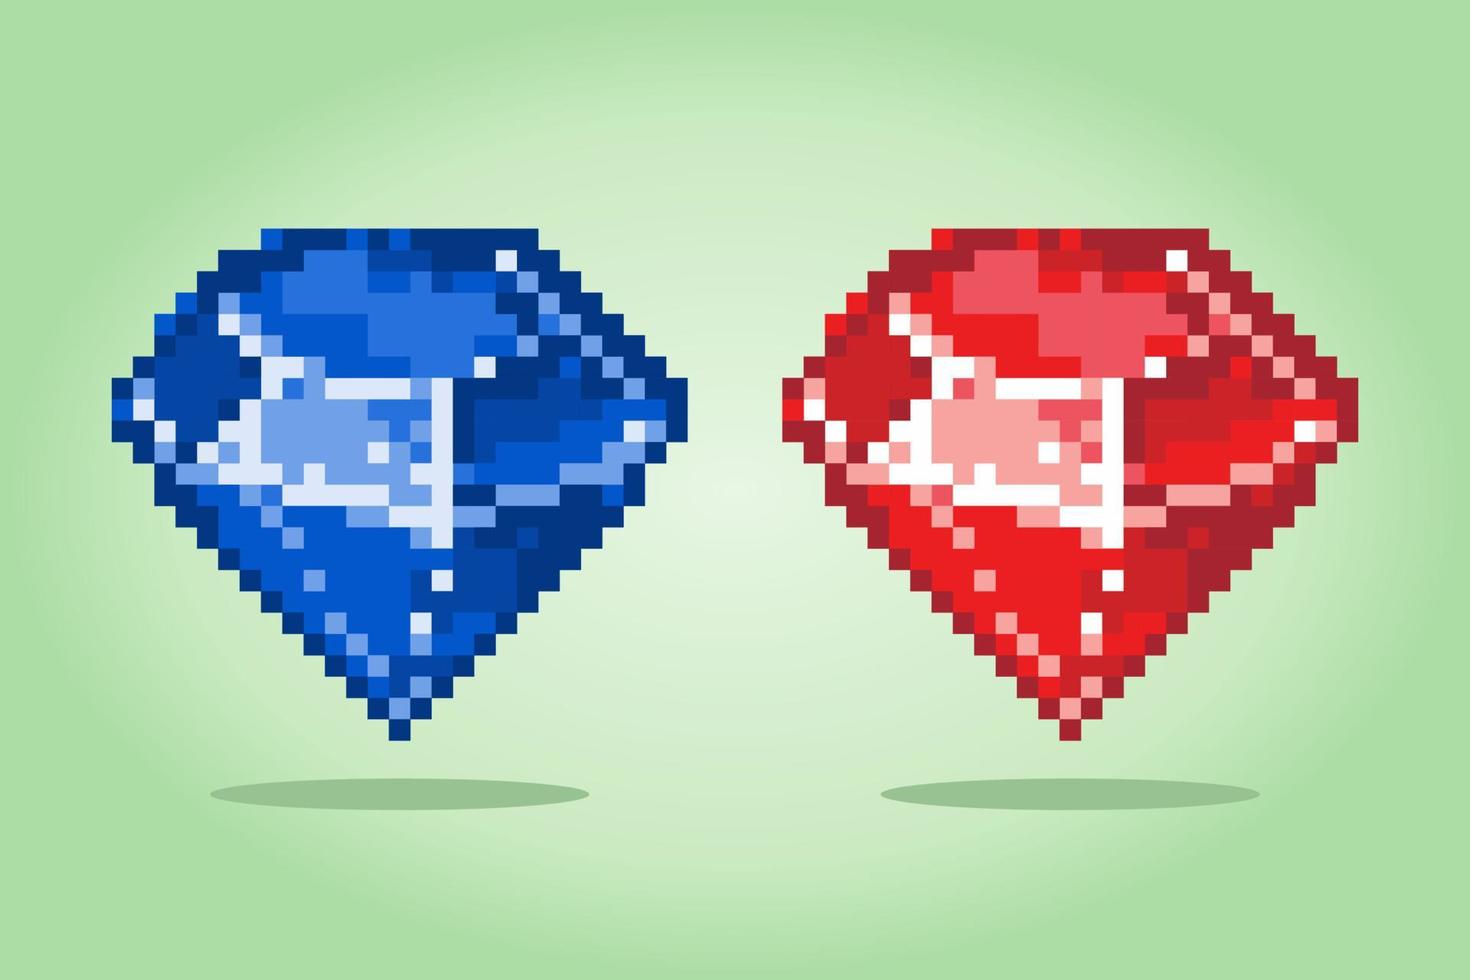 8 bit diamond pixels. Stone items for asset games in vector illustrations.